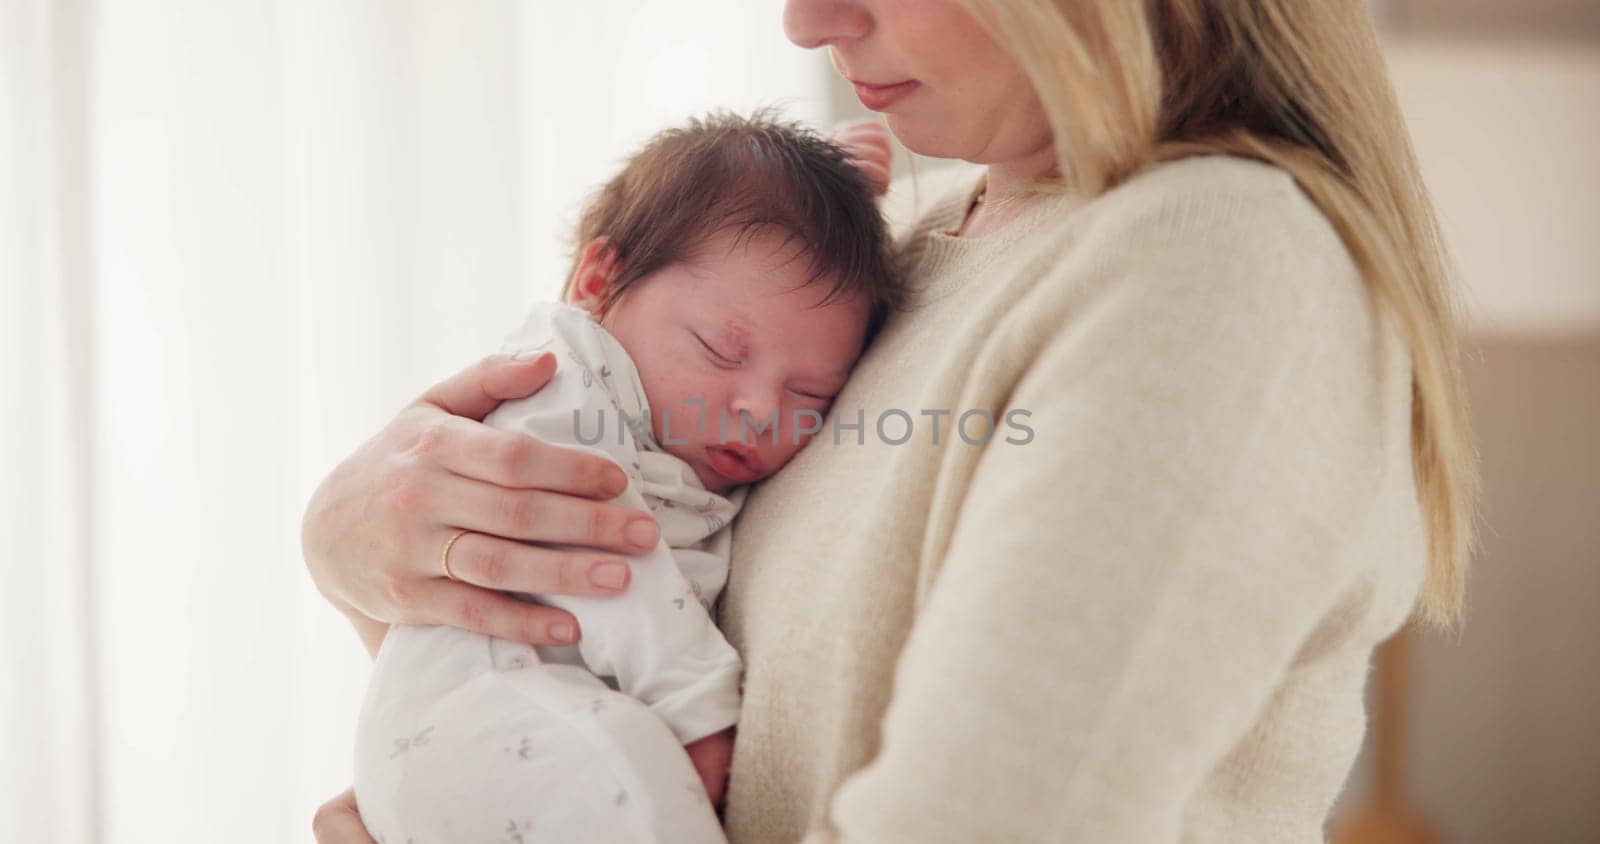 Family, sleeping and mother with baby in home for bonding, relationship and child development together. Newborn, motherhood and mom carrying infant for care, support and dreaming in nursery room.